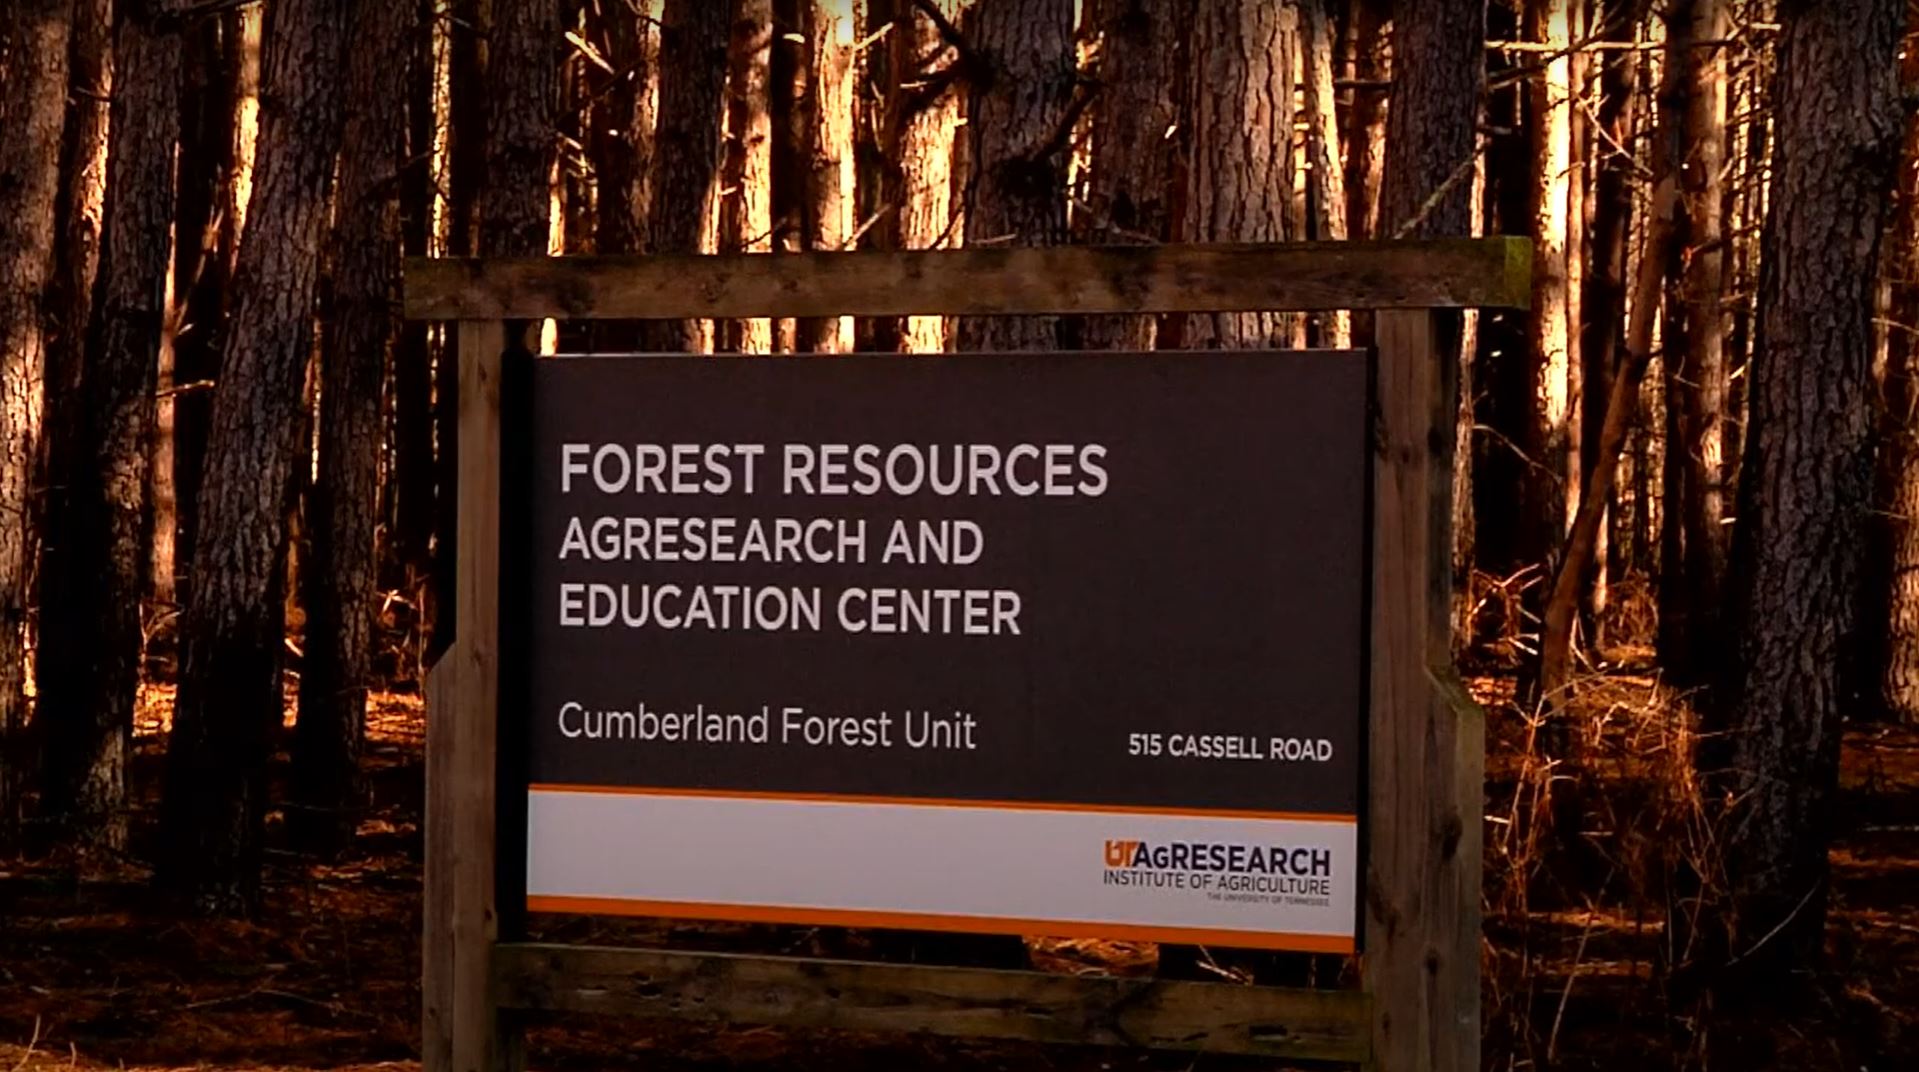 Sign for Forest Resources AgResearch and Education Center at Cumberland Forest Unit for UT AgResearch.